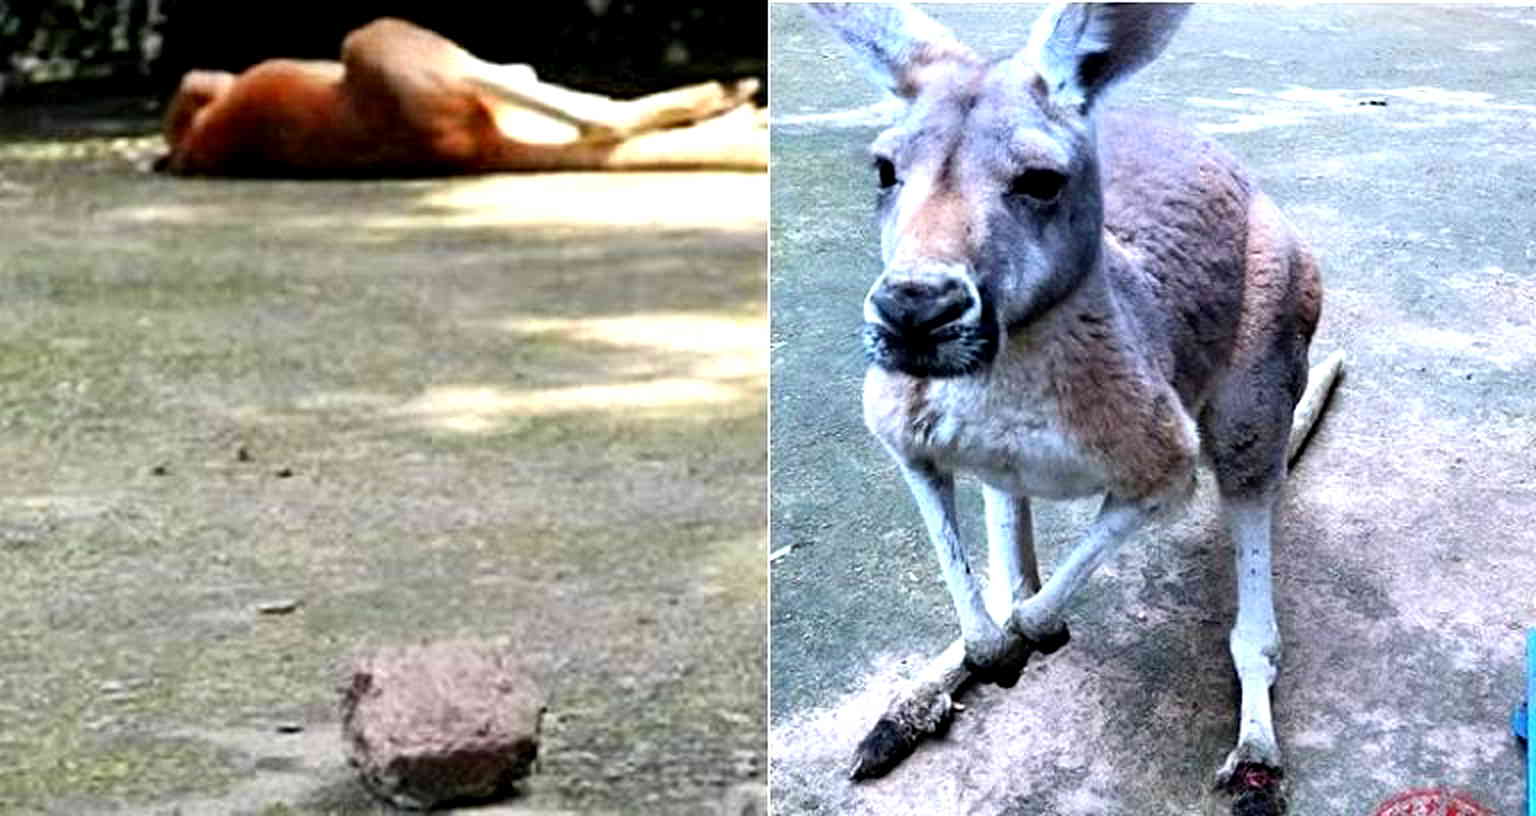 Kangaroo Dies in Chinese Zoo After Visitors Throw Rocks to Get Its Attention